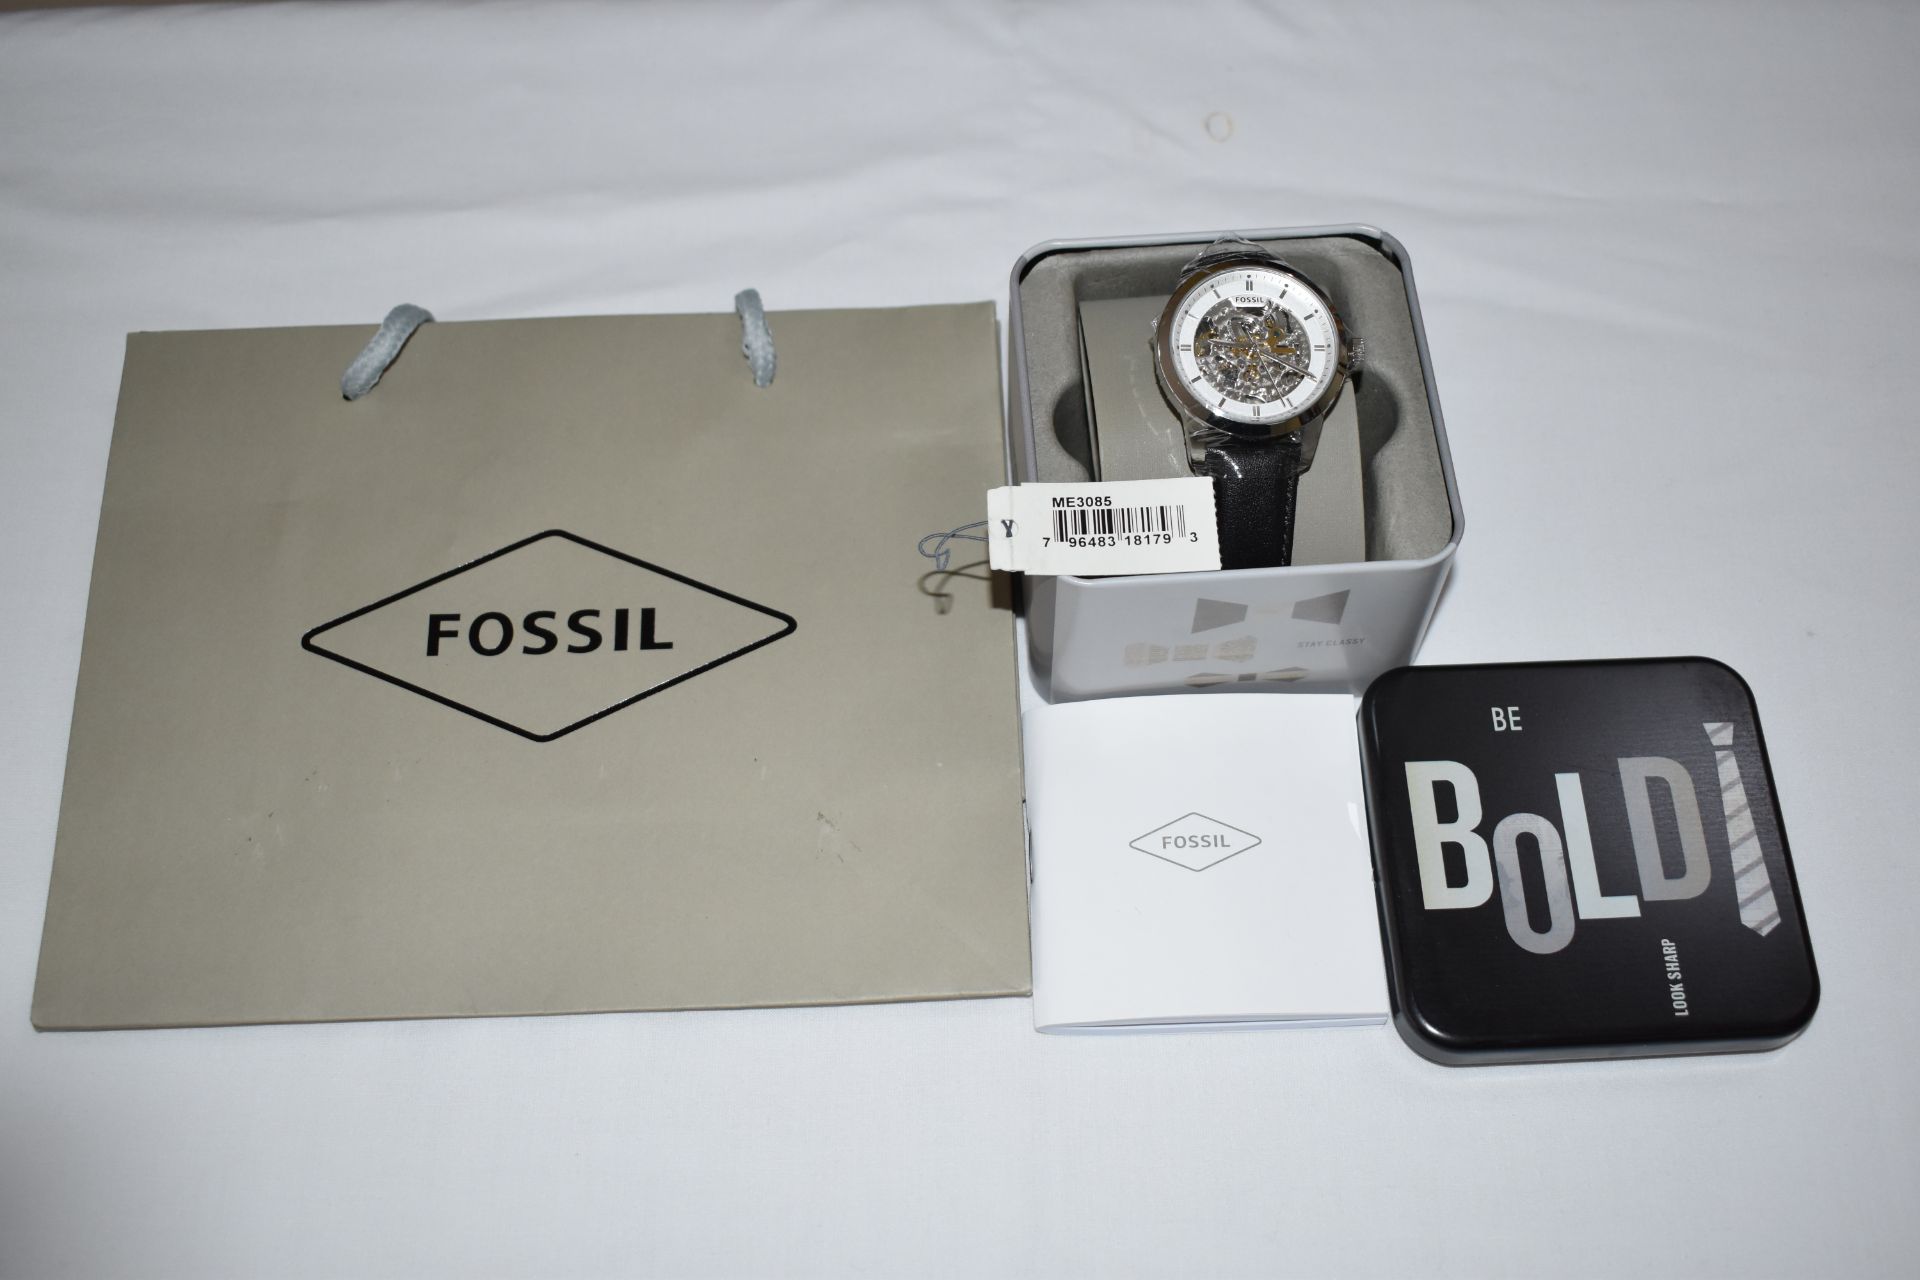 Fossil Men's Watch ME3085 - Image 2 of 3